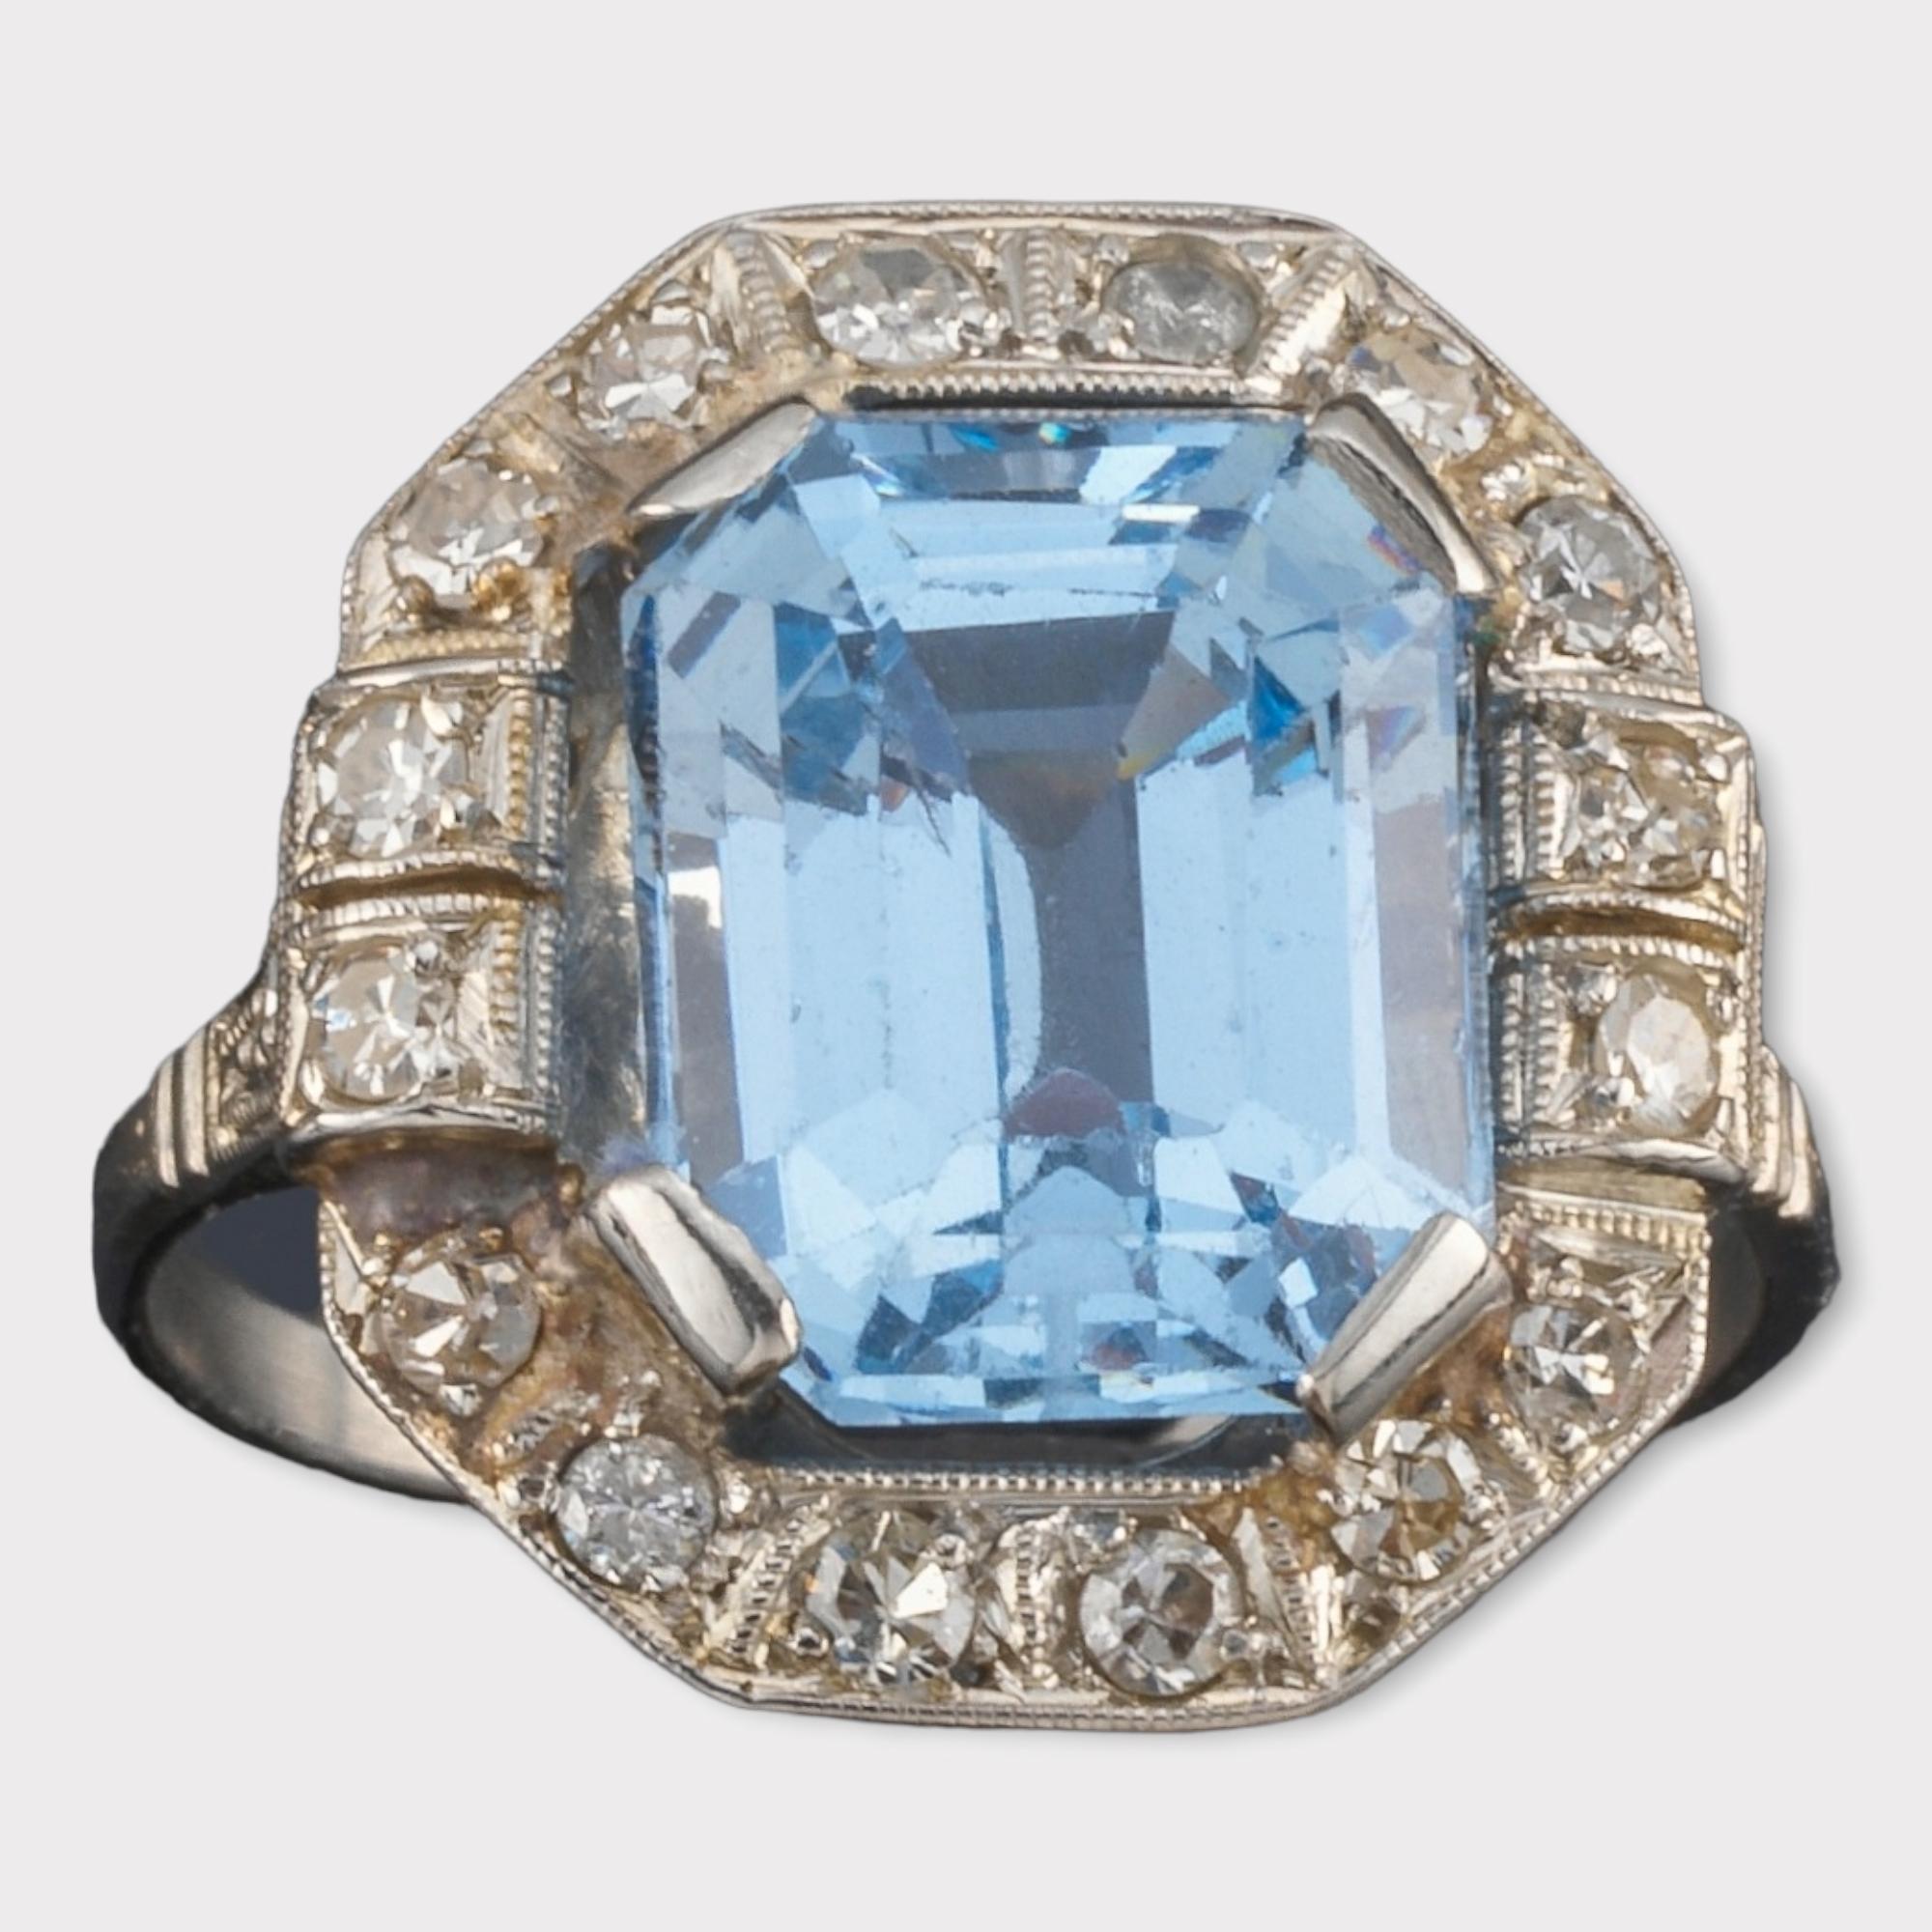 Antique Original Art-Deco 4.48 carat Aquamarine and Diamond Ring in Platinum

Platinum (tested) ring made in the early 1920s. It has been set with a proportioned emerald-cut aquamarine (4.48cts) aglow with a serene azure blue hue. The bezel-set